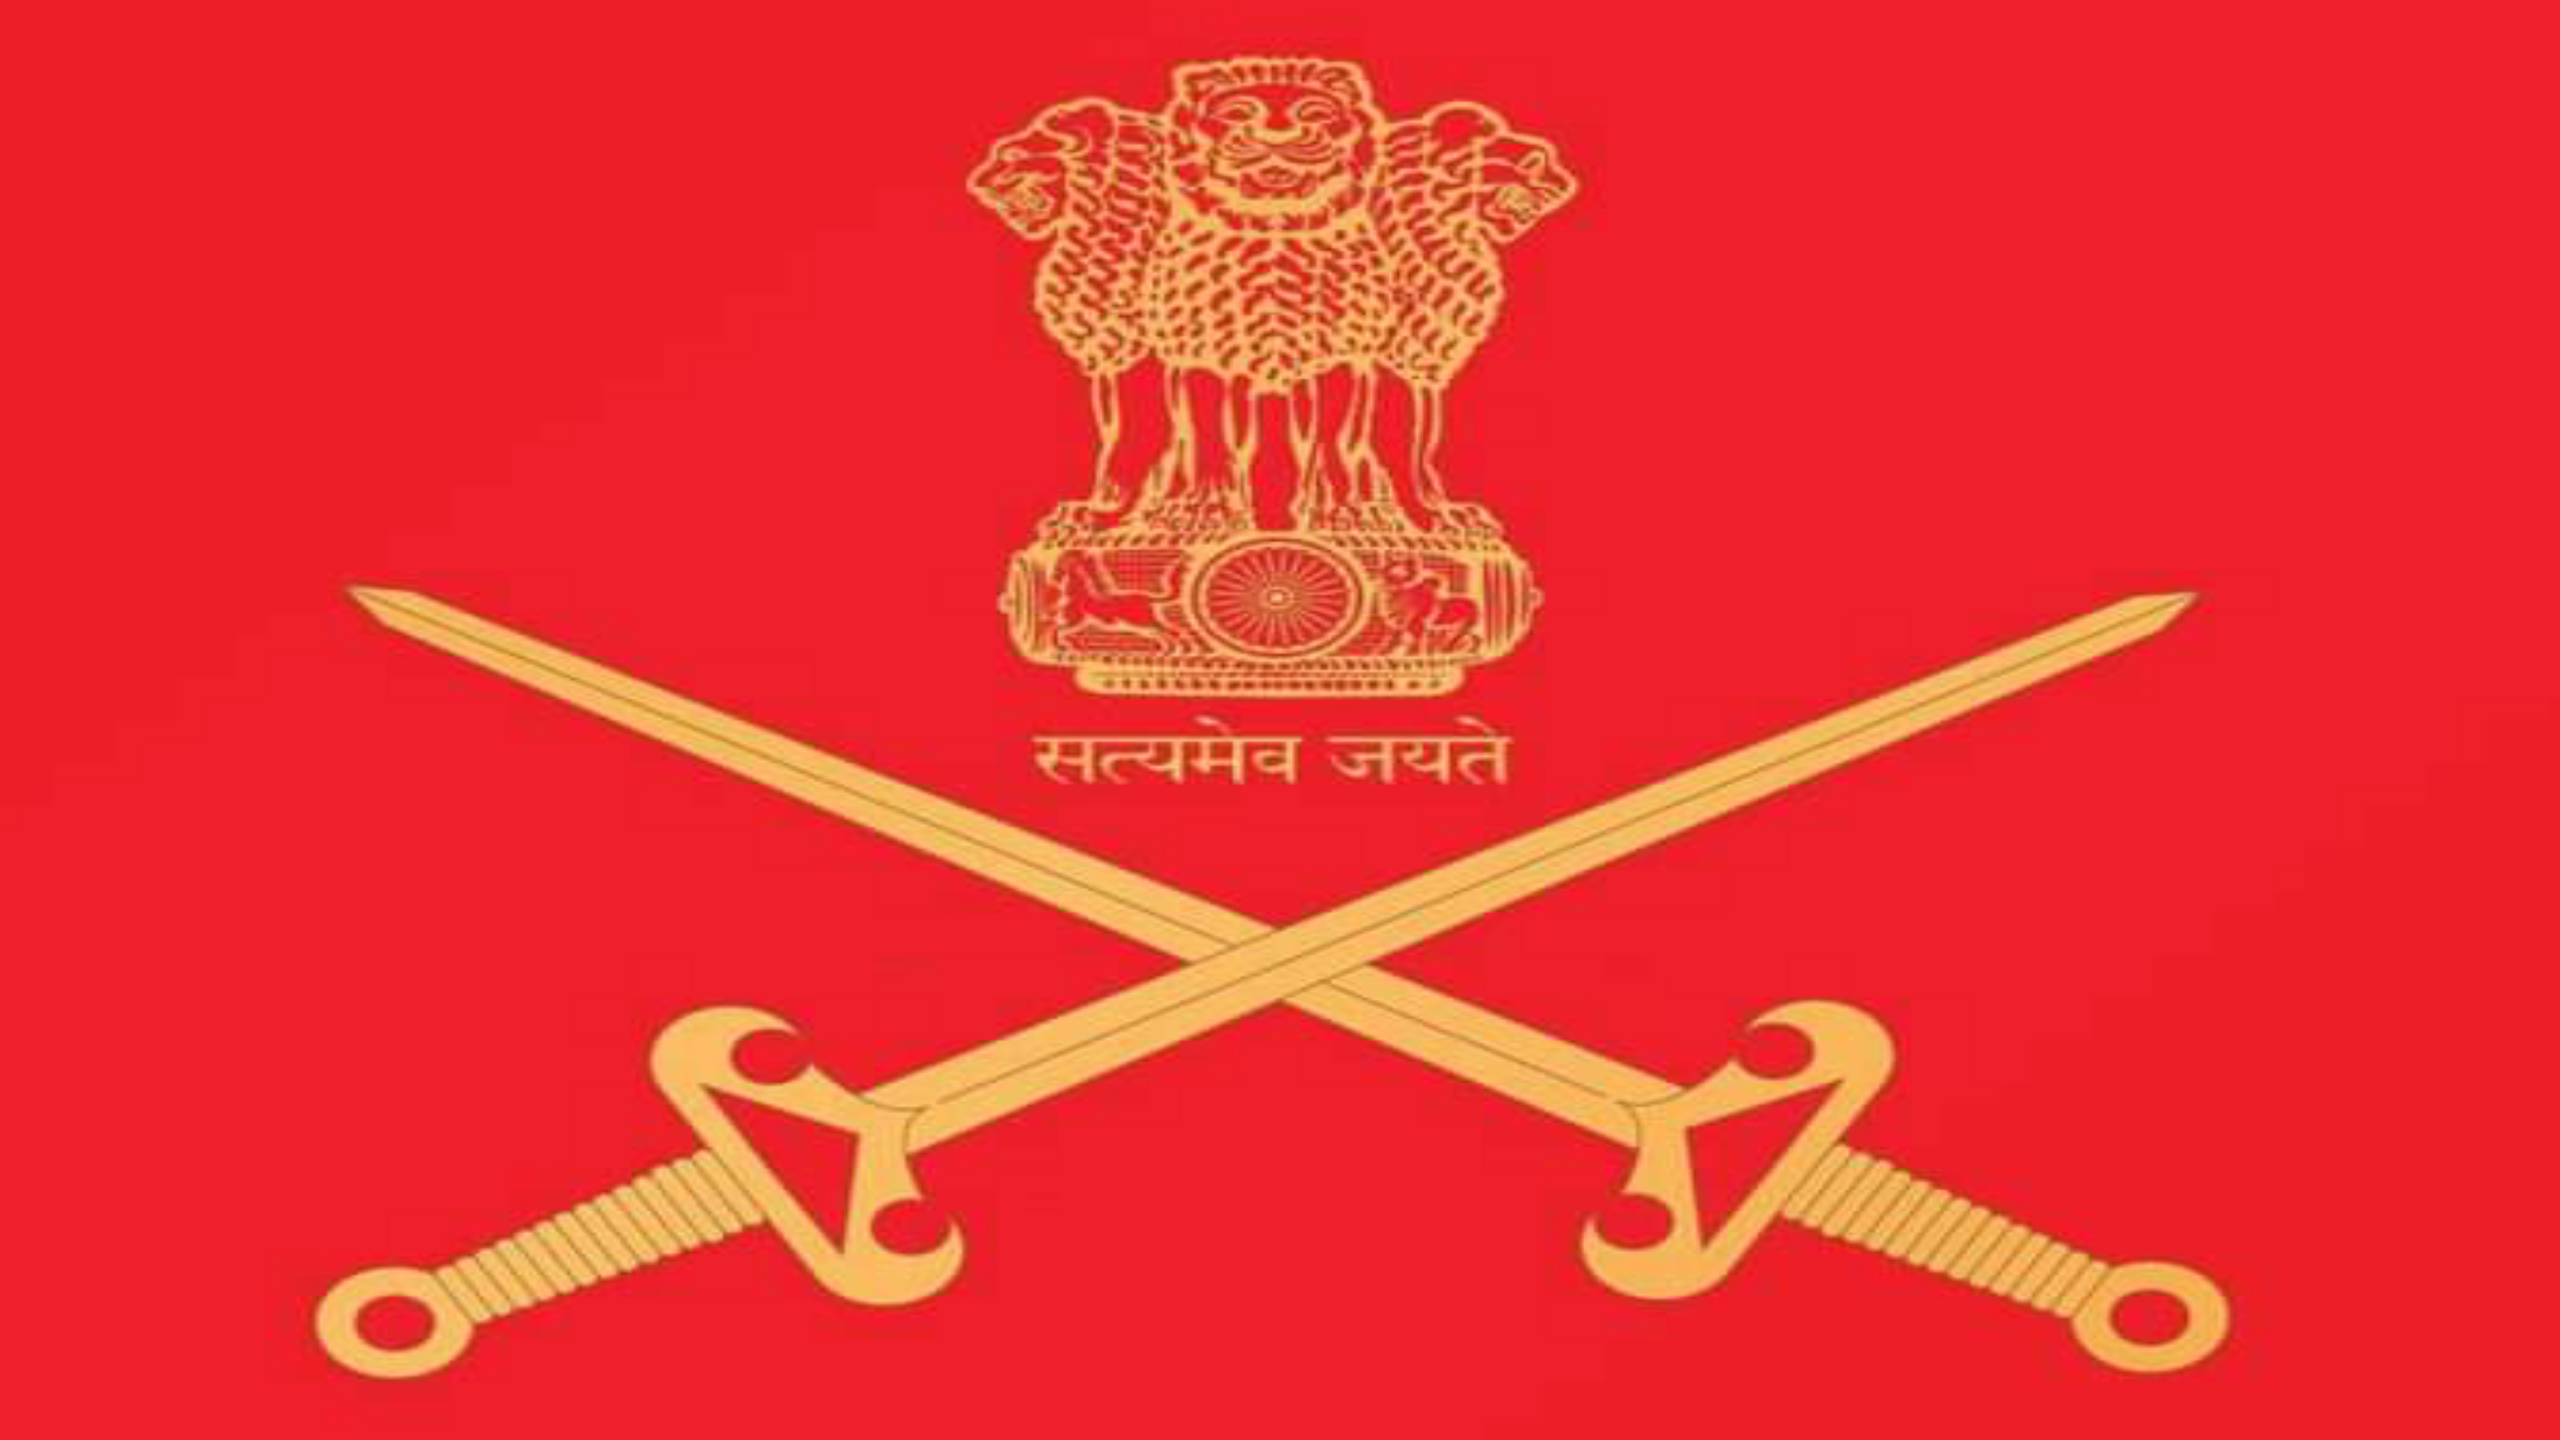 Indian Army Recruitment Details, Join Indian Army, Indian Army Job Vacancy, Indian Army, Join Indian Army Online Application, Join Indian Army Online Registration, Indian Army Recruitment 2021